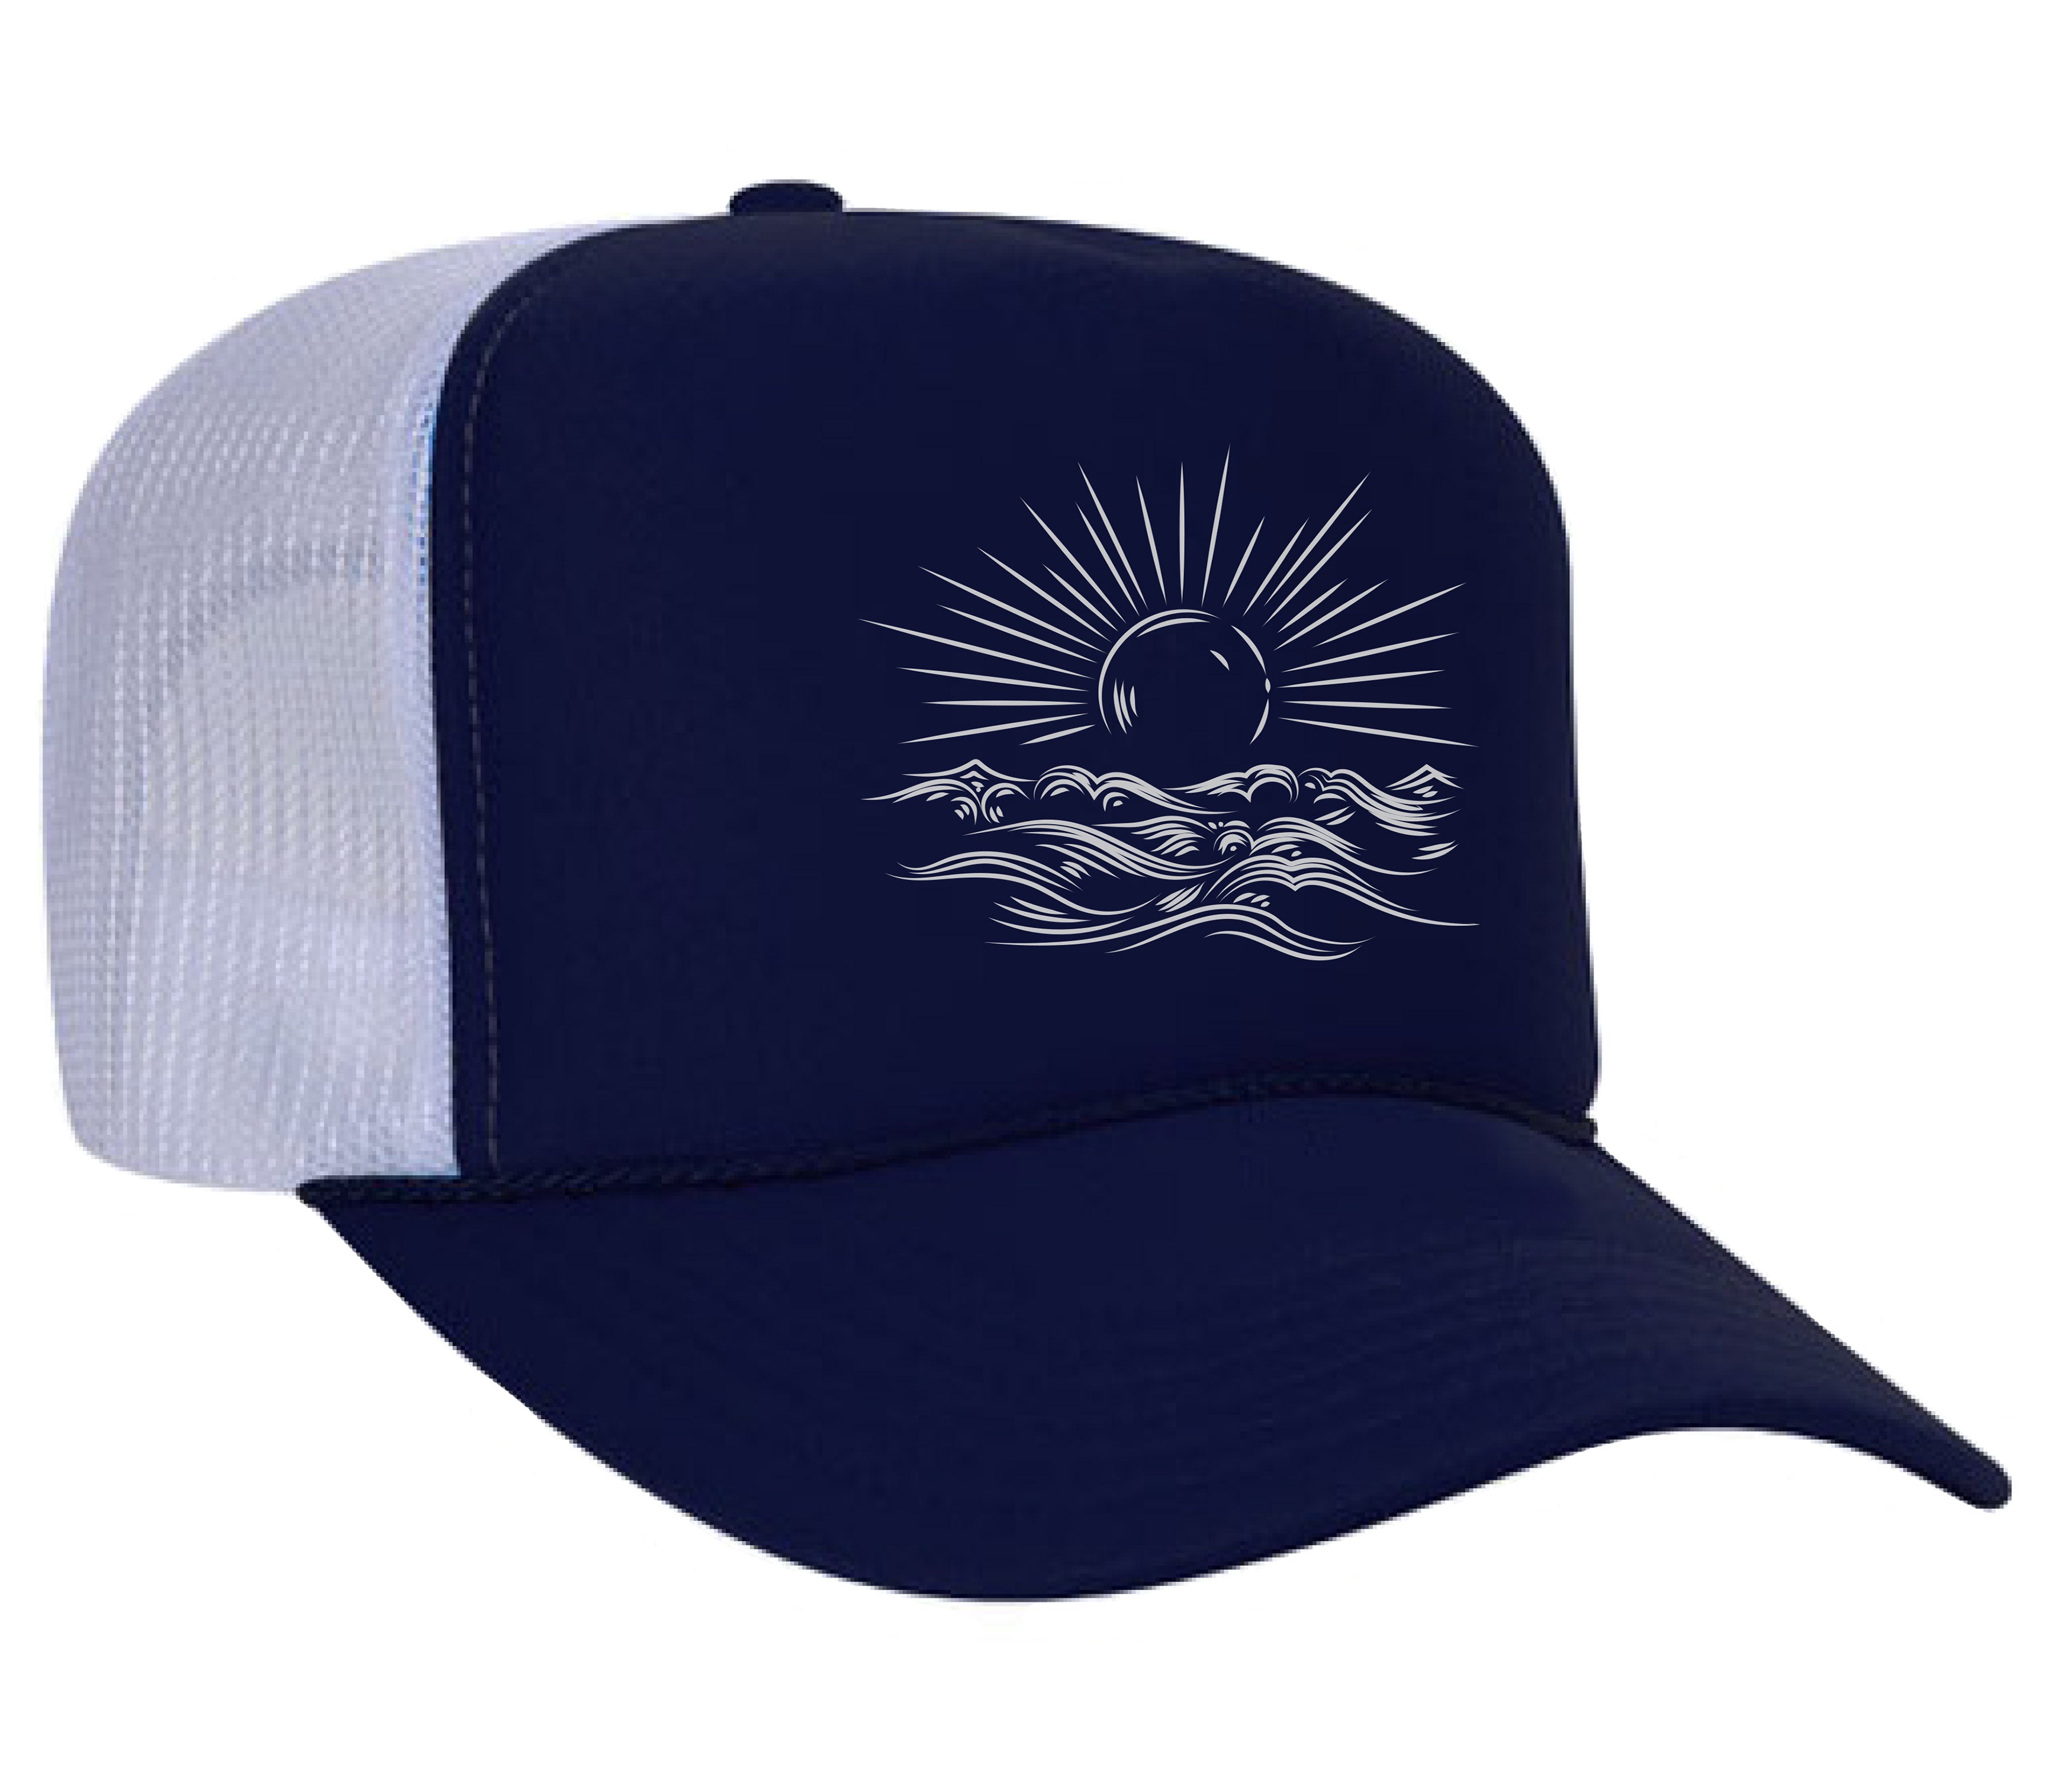 Outdoor inspired graphic art driven hats for men and women